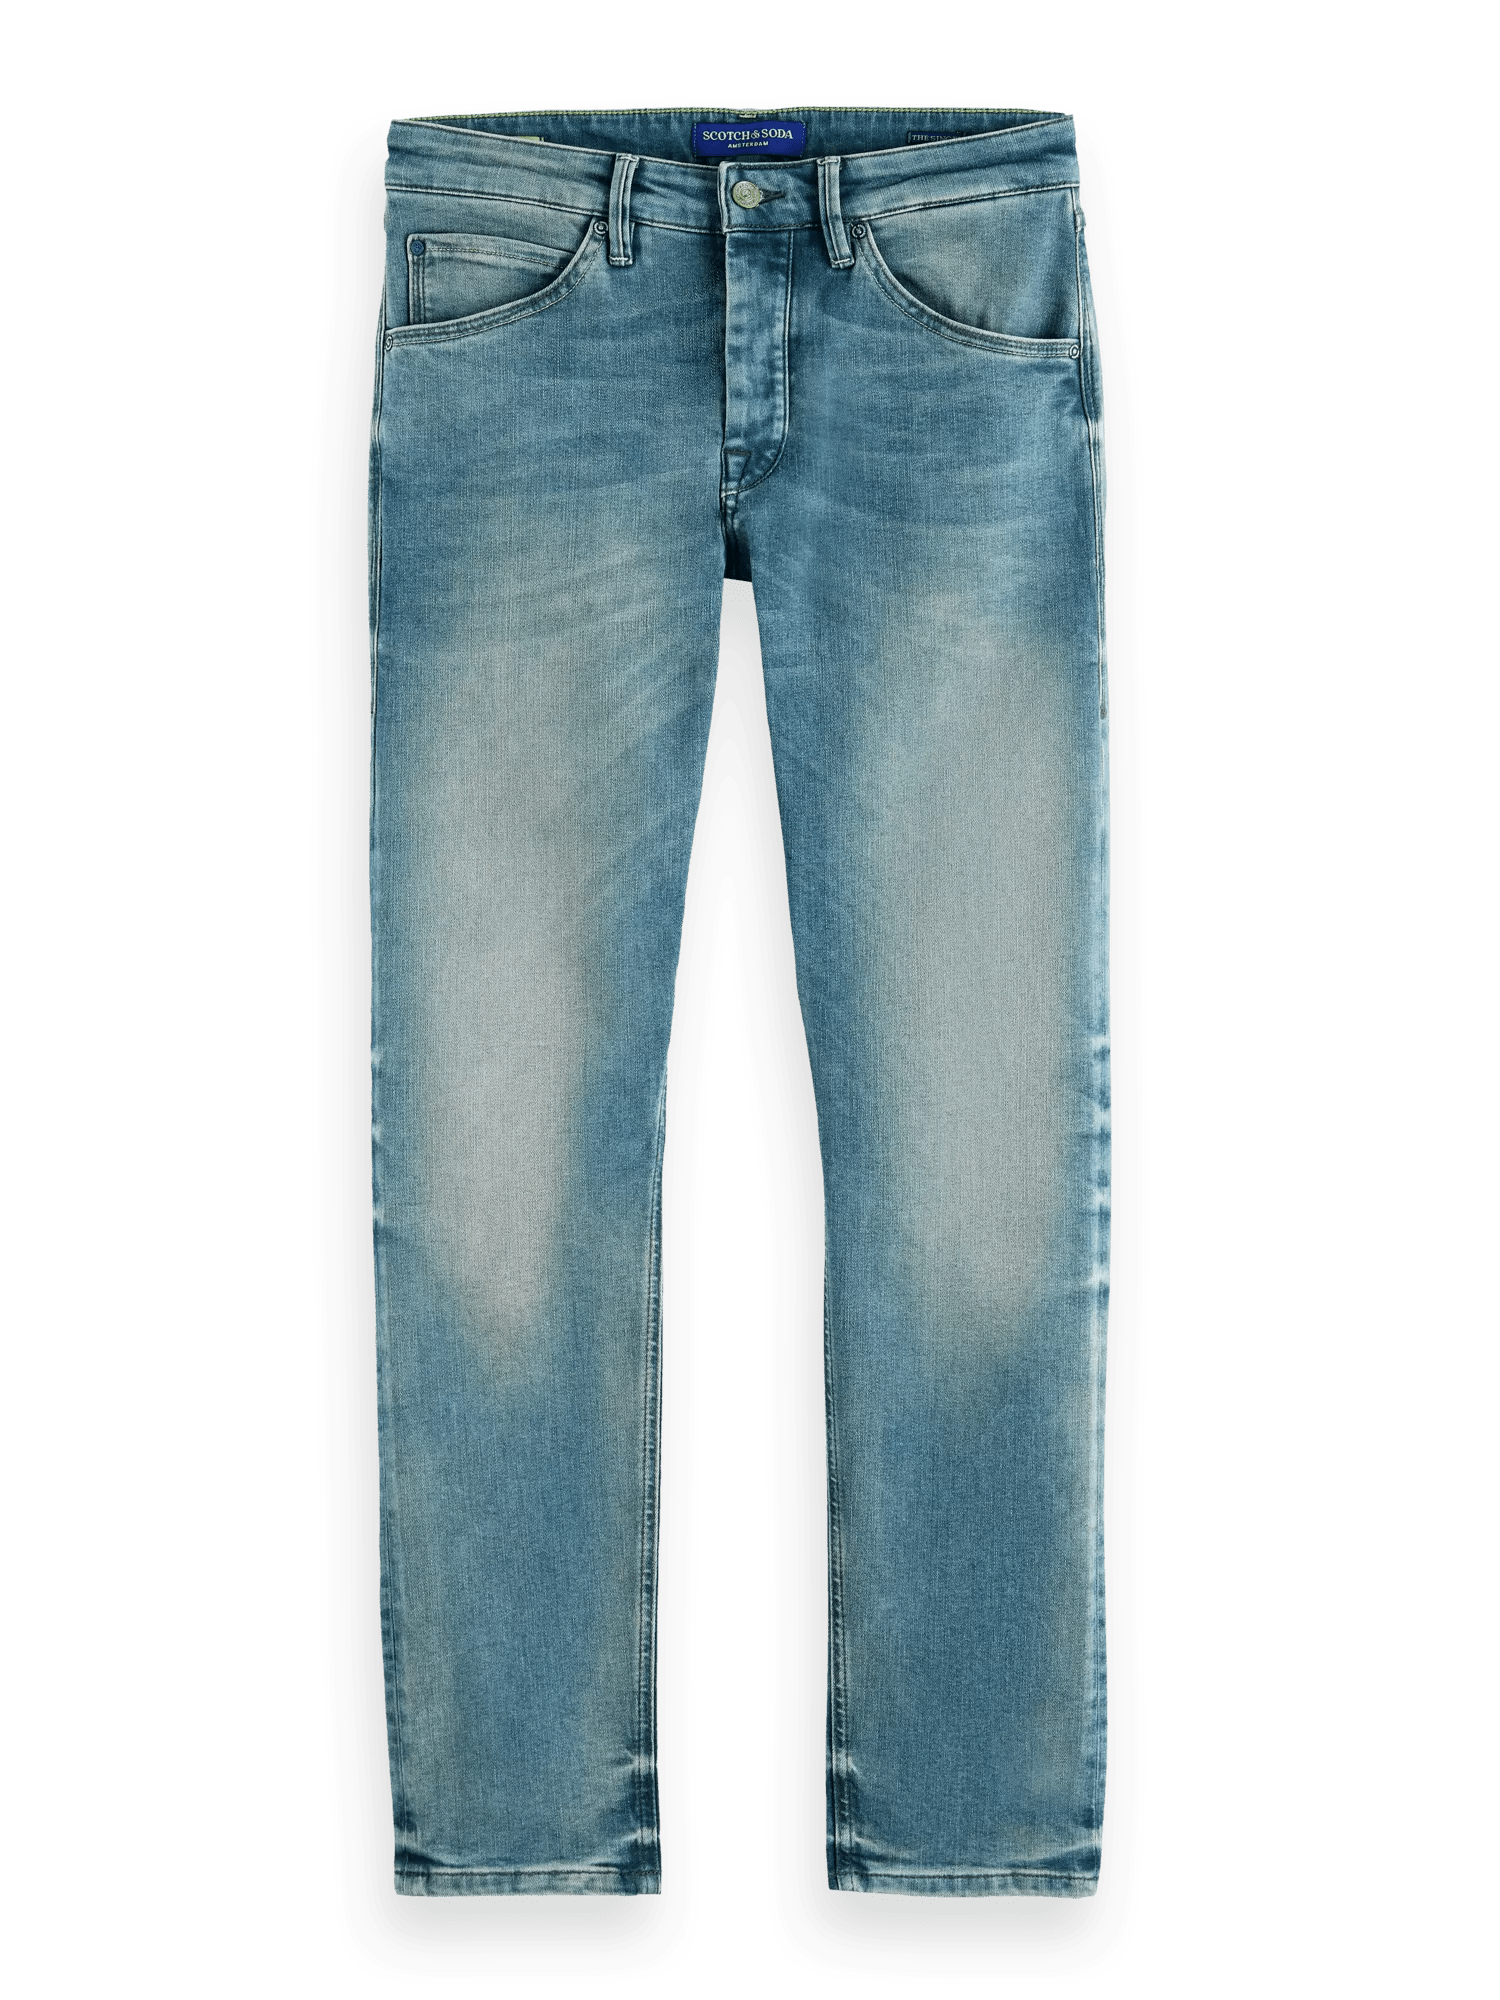 Scotch & Soda The Singel Slim Tapered Fit Jeans – Faded Blue FNT